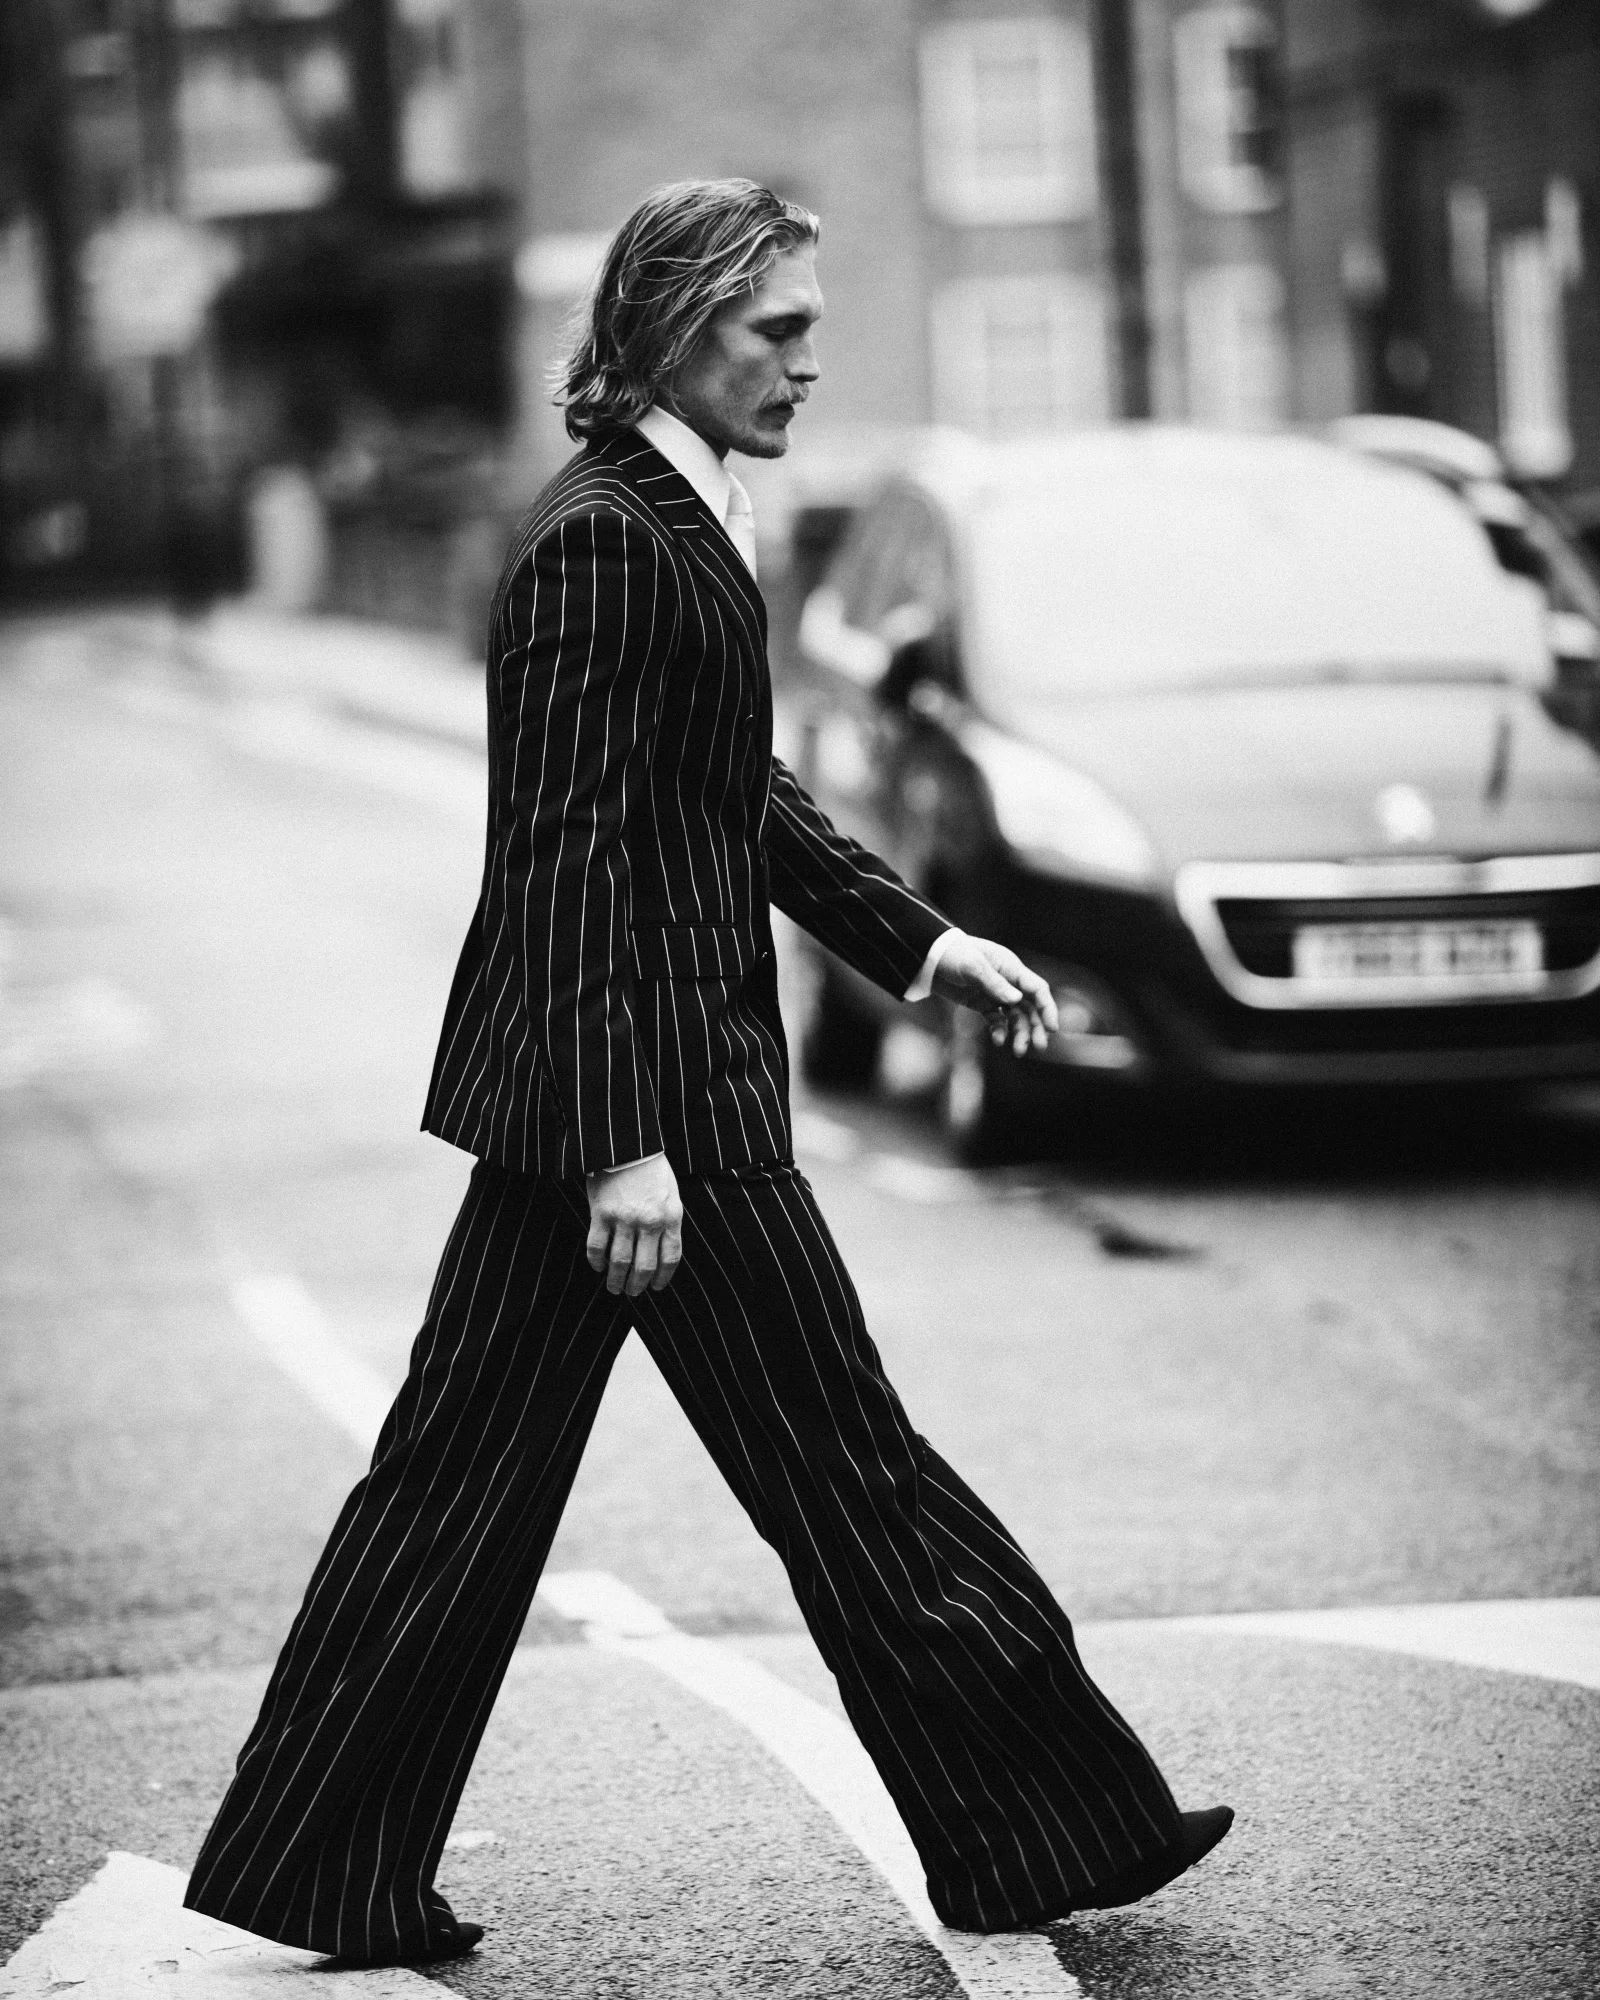 Harry Goodwins for Man About Town UK 6 by Jason HETHERINGTON